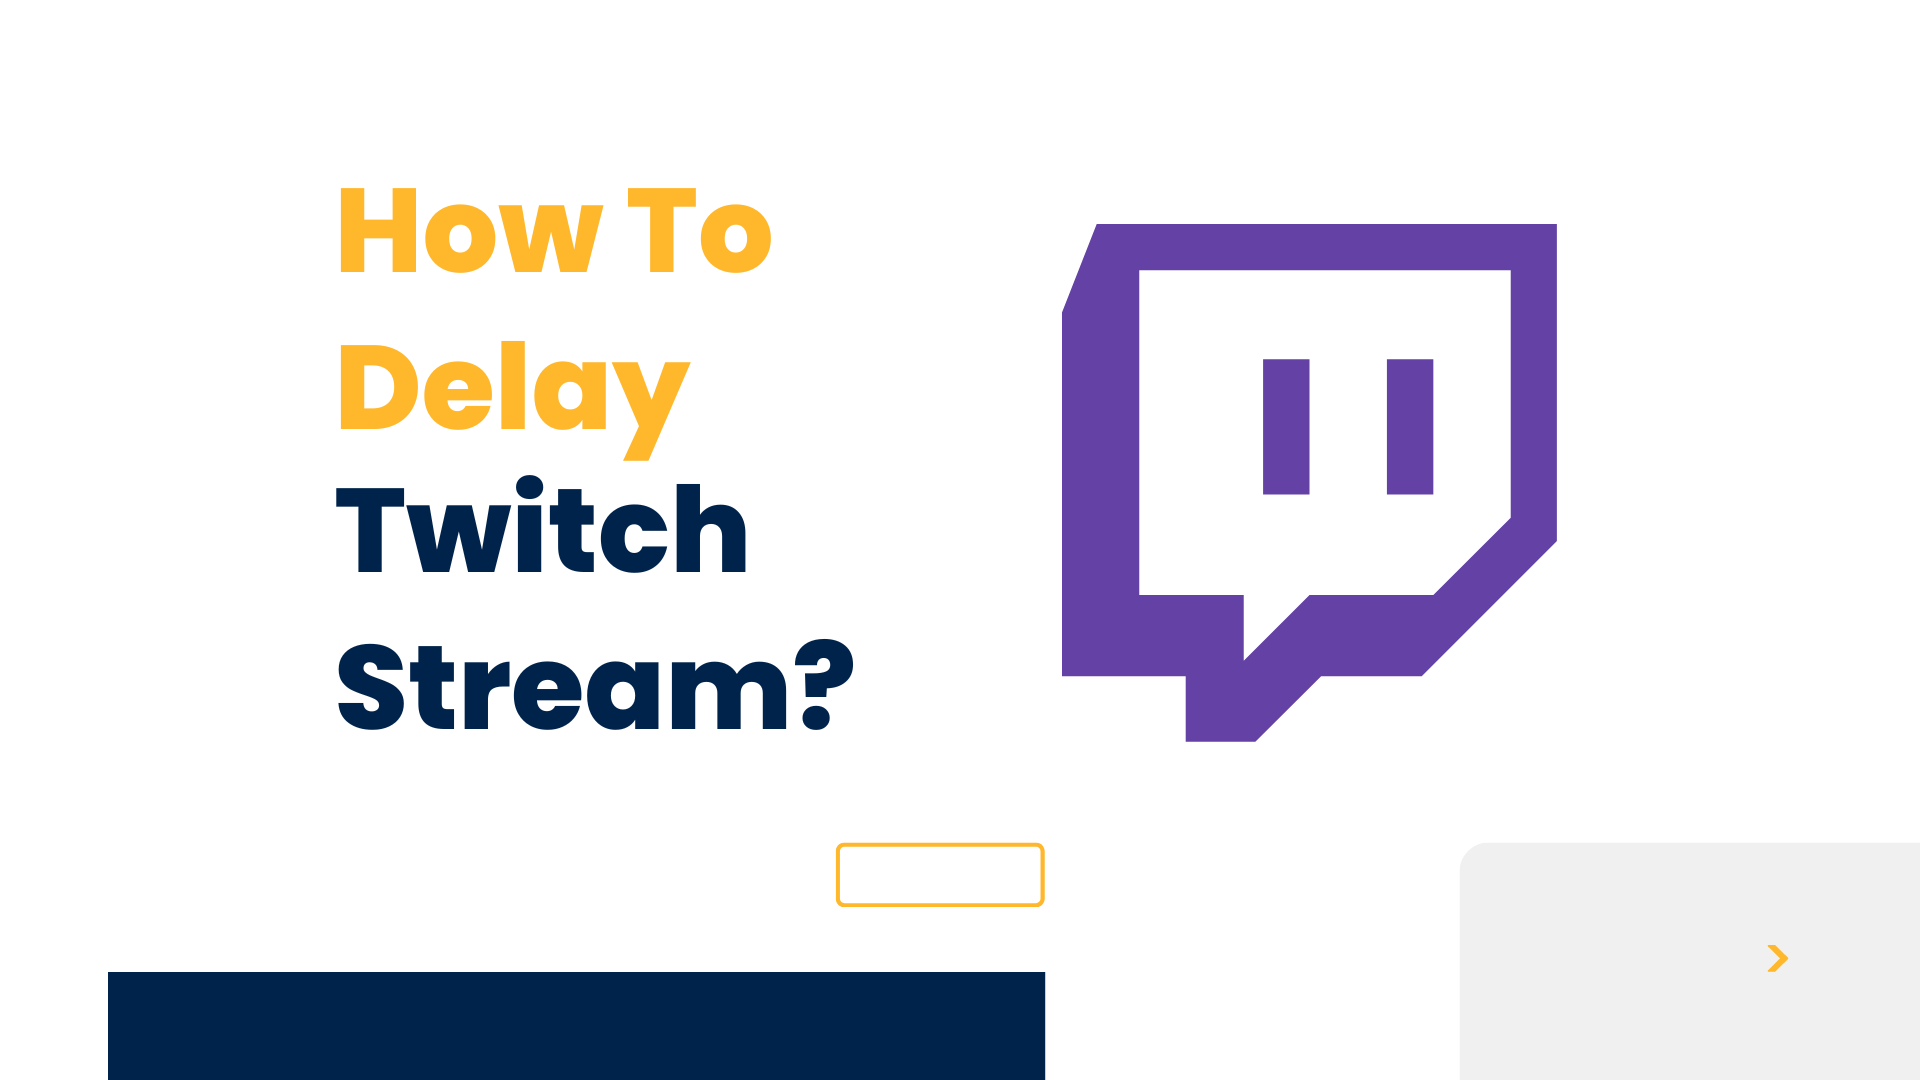 How To Delay Twitch Stream?